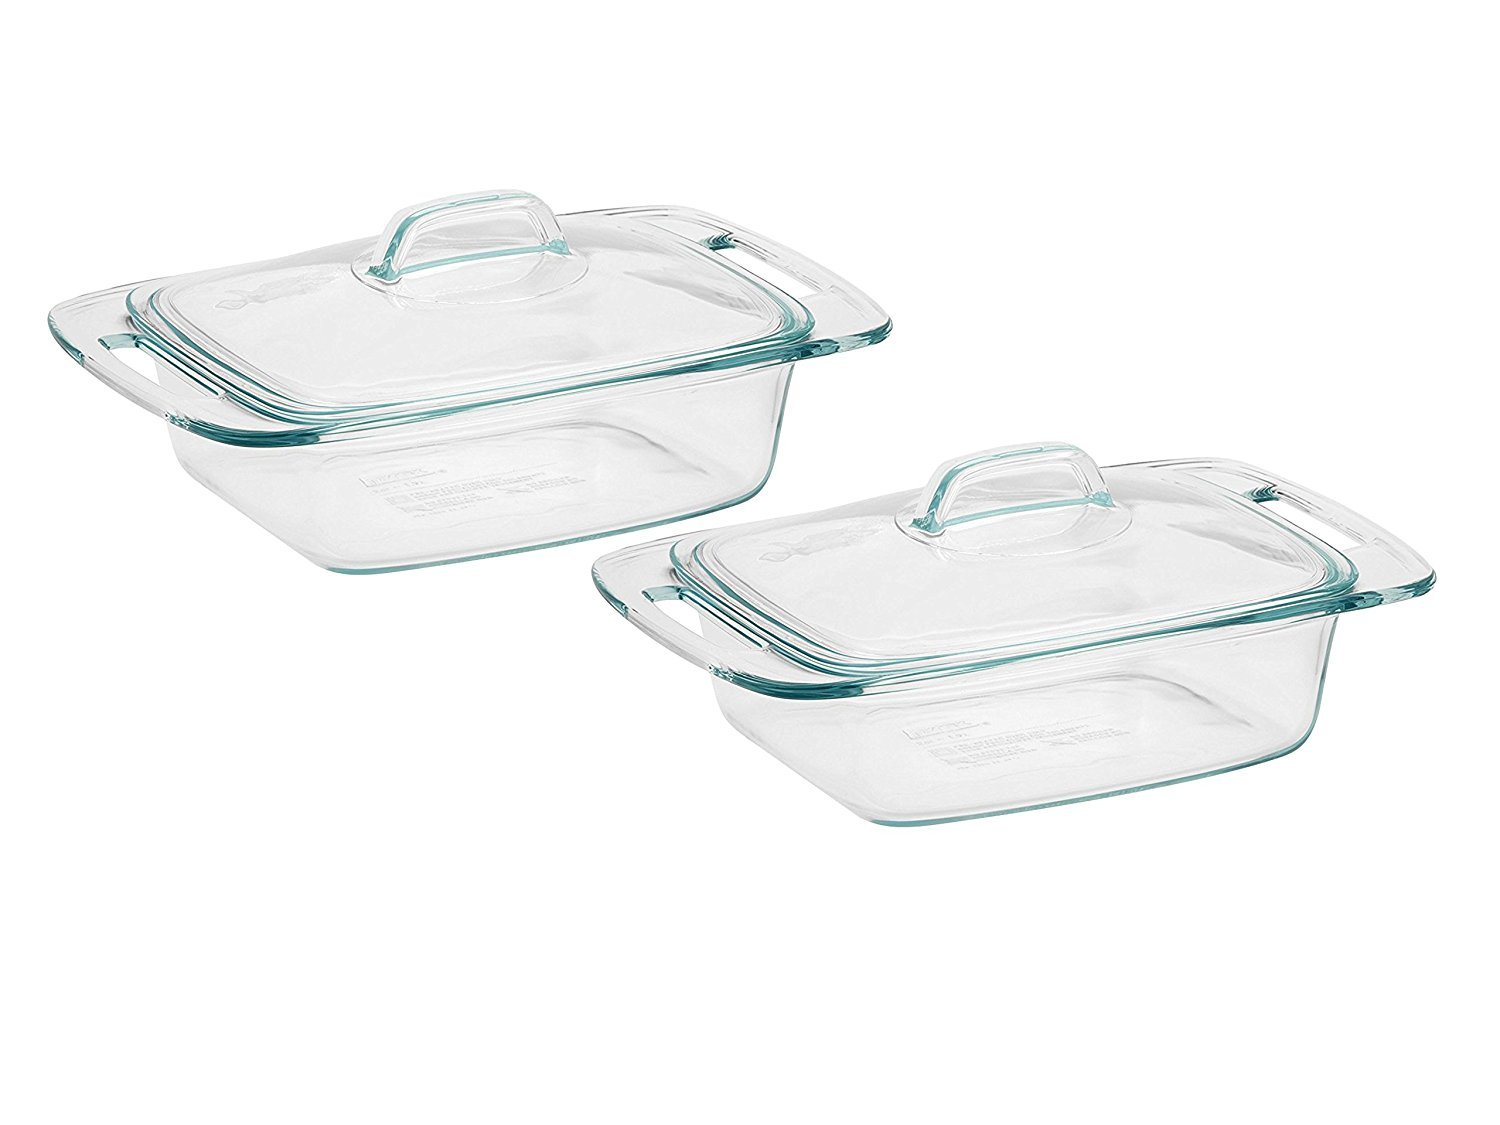 Pyrex Easy Grab Casserole Dishes, 2-Pieces